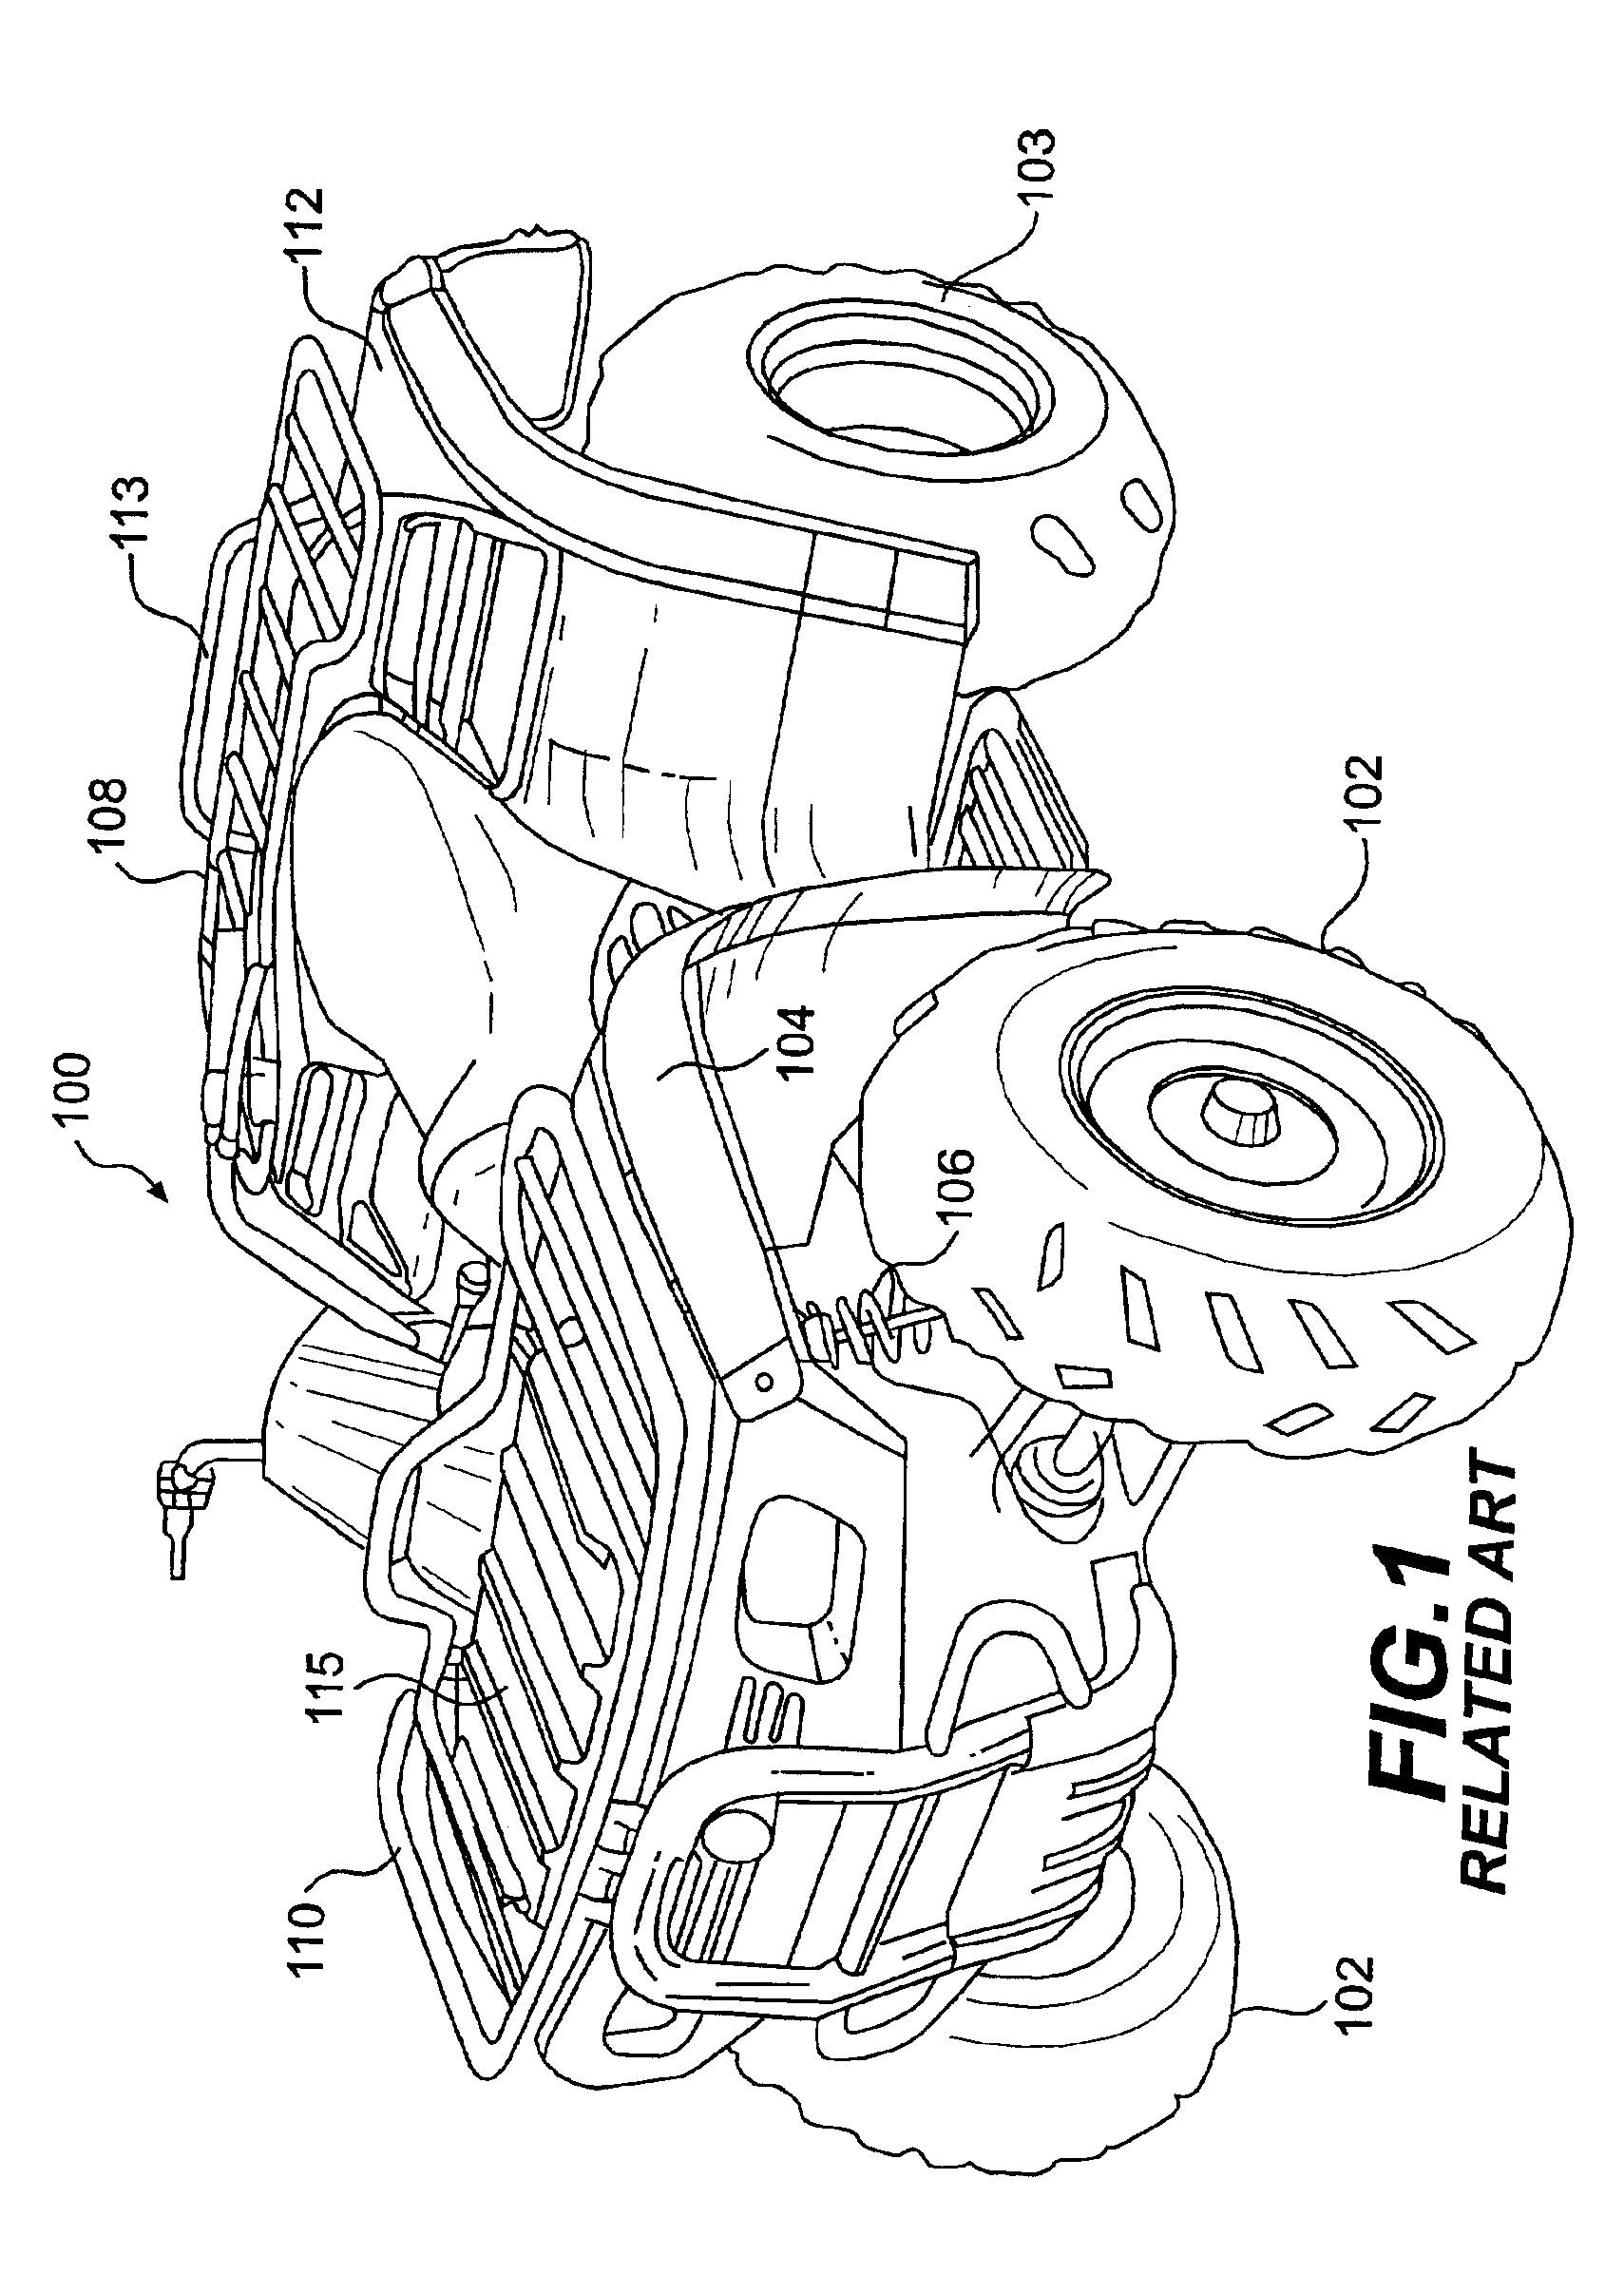 Fender structure for an all terrain vehicle